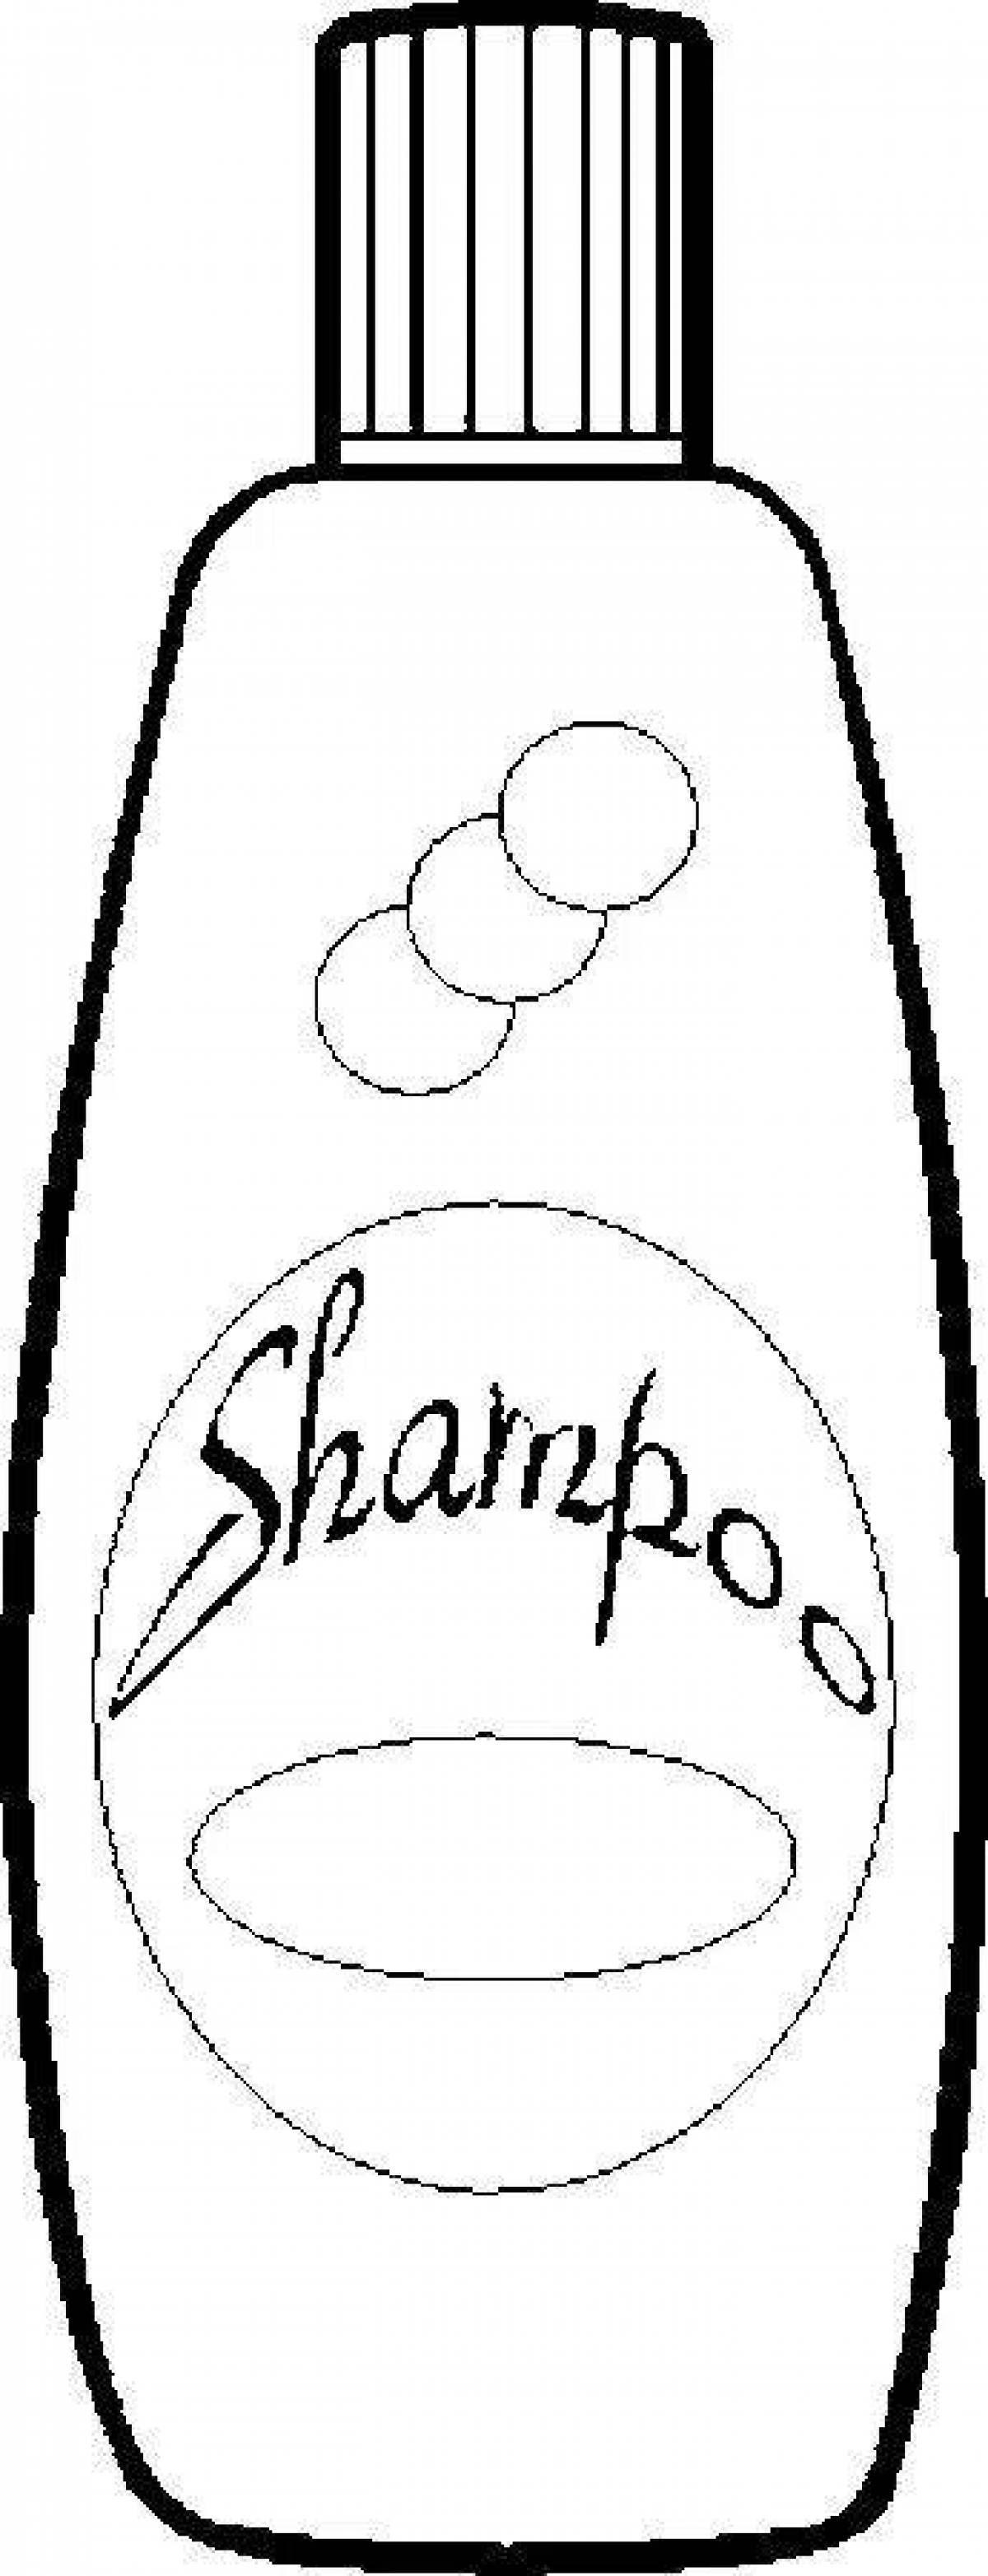 Gourmet shampoo coloring page